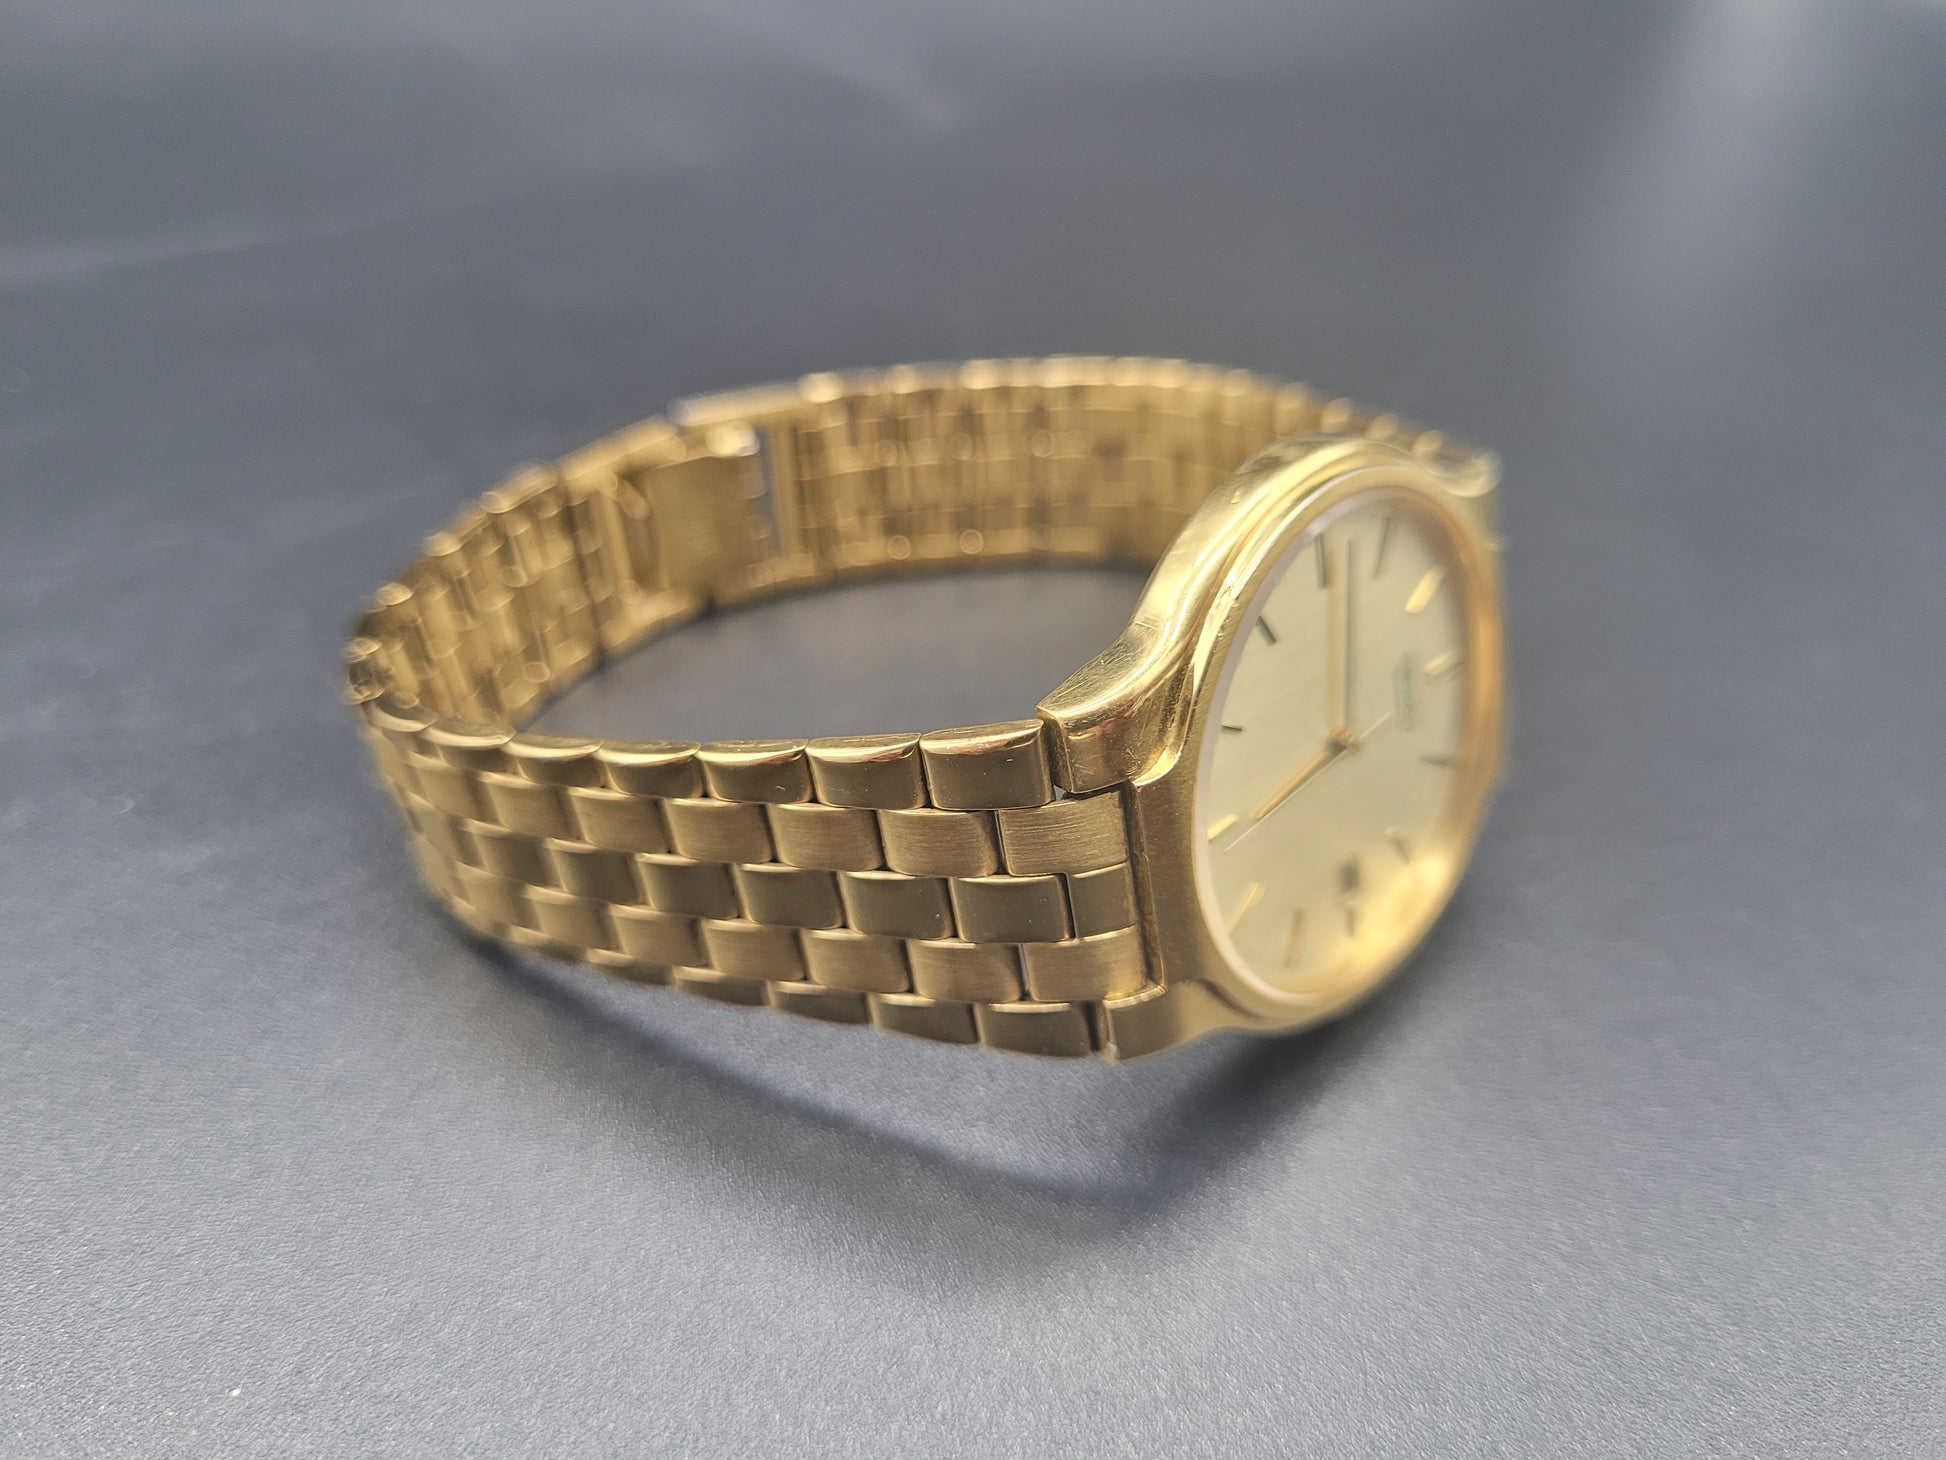 Vintage Gold Watches online Seiko Gold Plated Watch Champagne Dial 36mm